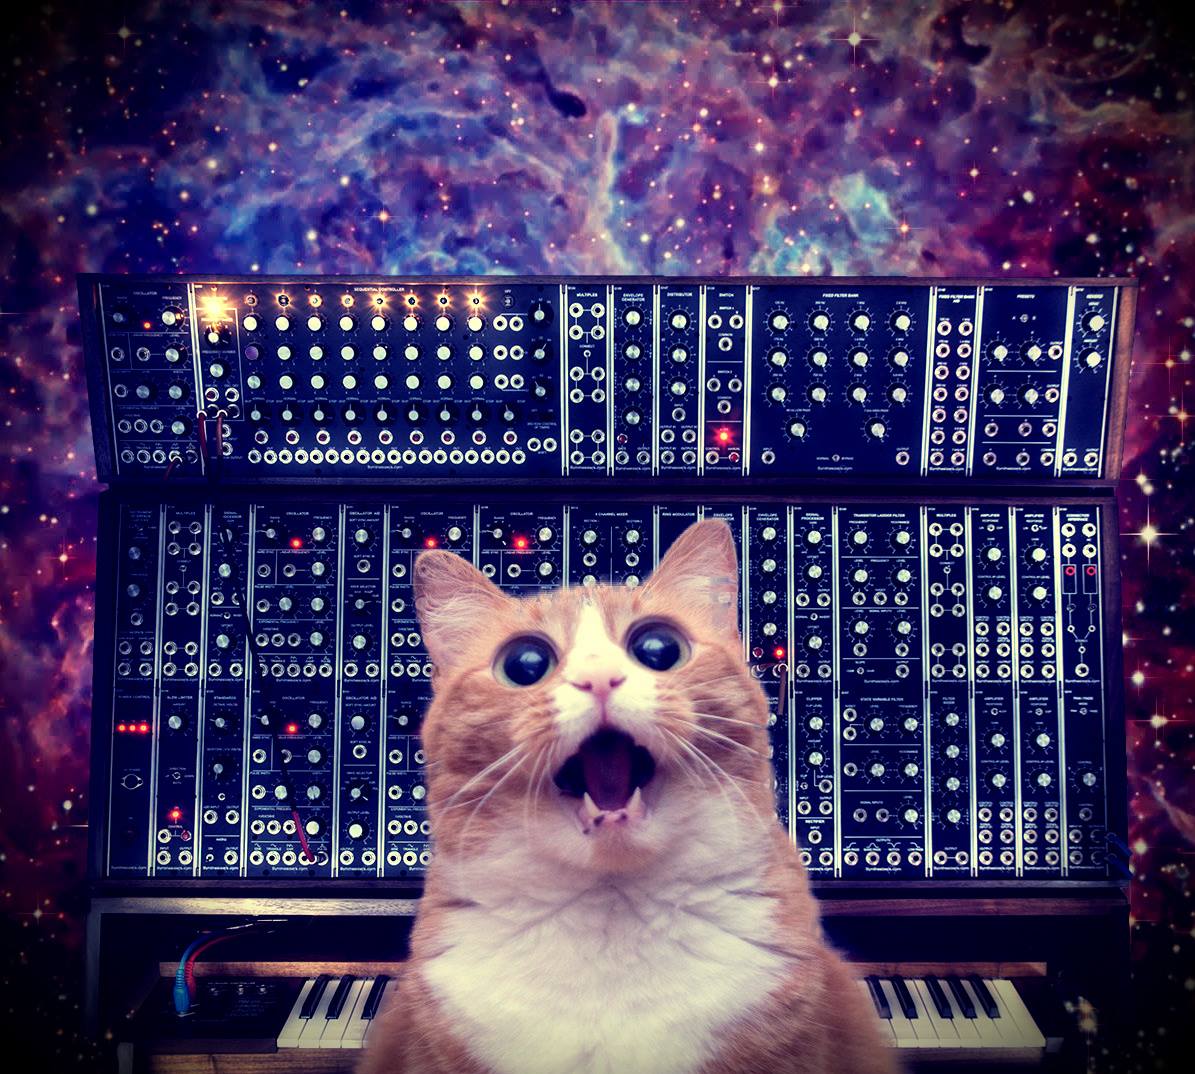 http://www.letsbebrief.co.uk/letsbebrief-content/uploads/cats_on_synthesizers_in_space_12.jpg